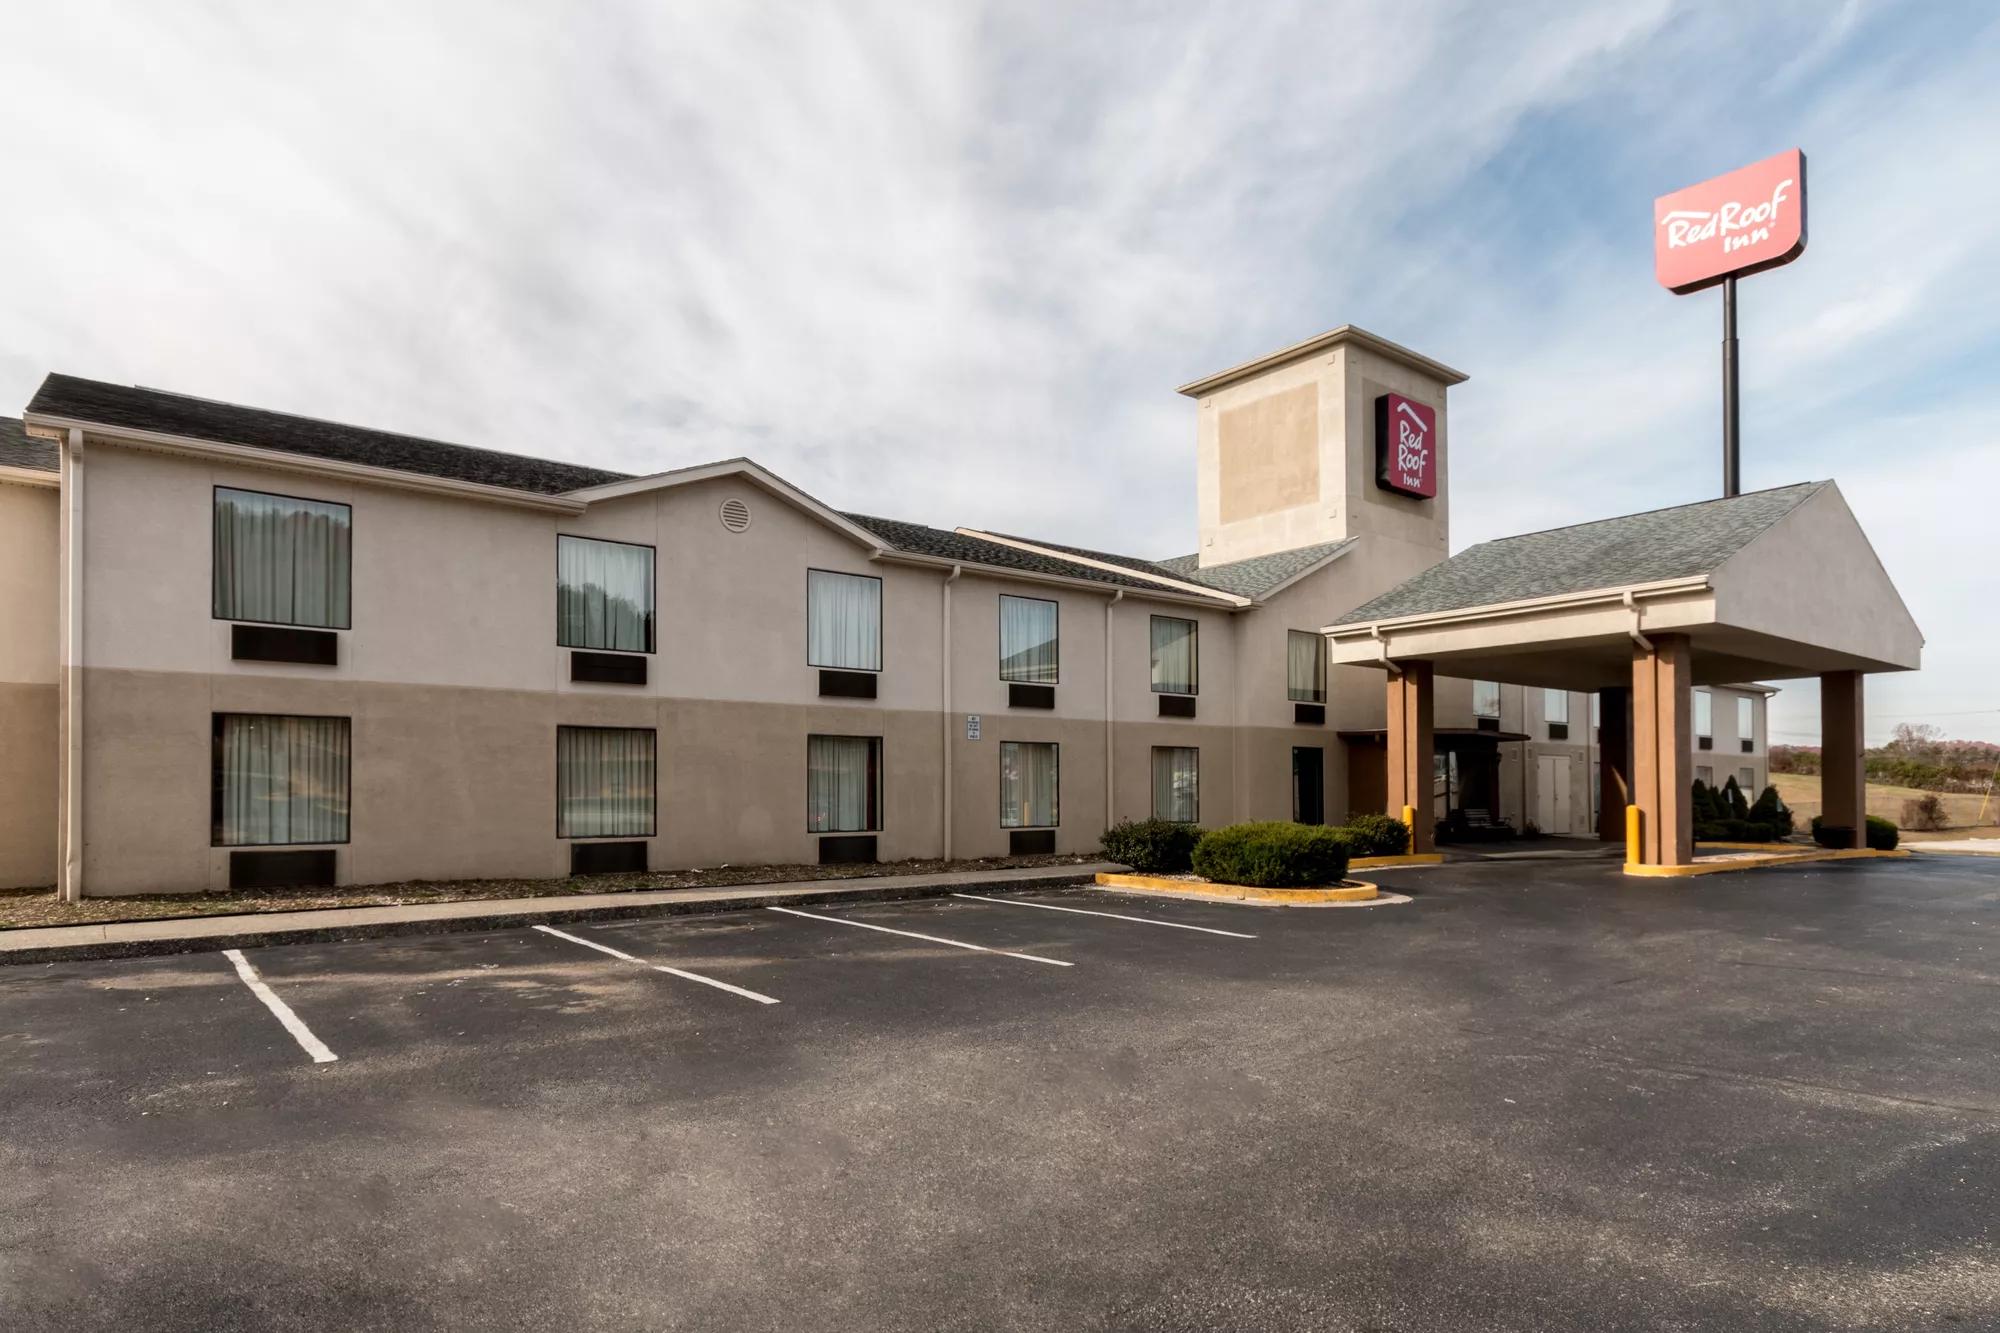 Red Roof Inn Morehead Exterior Property Image